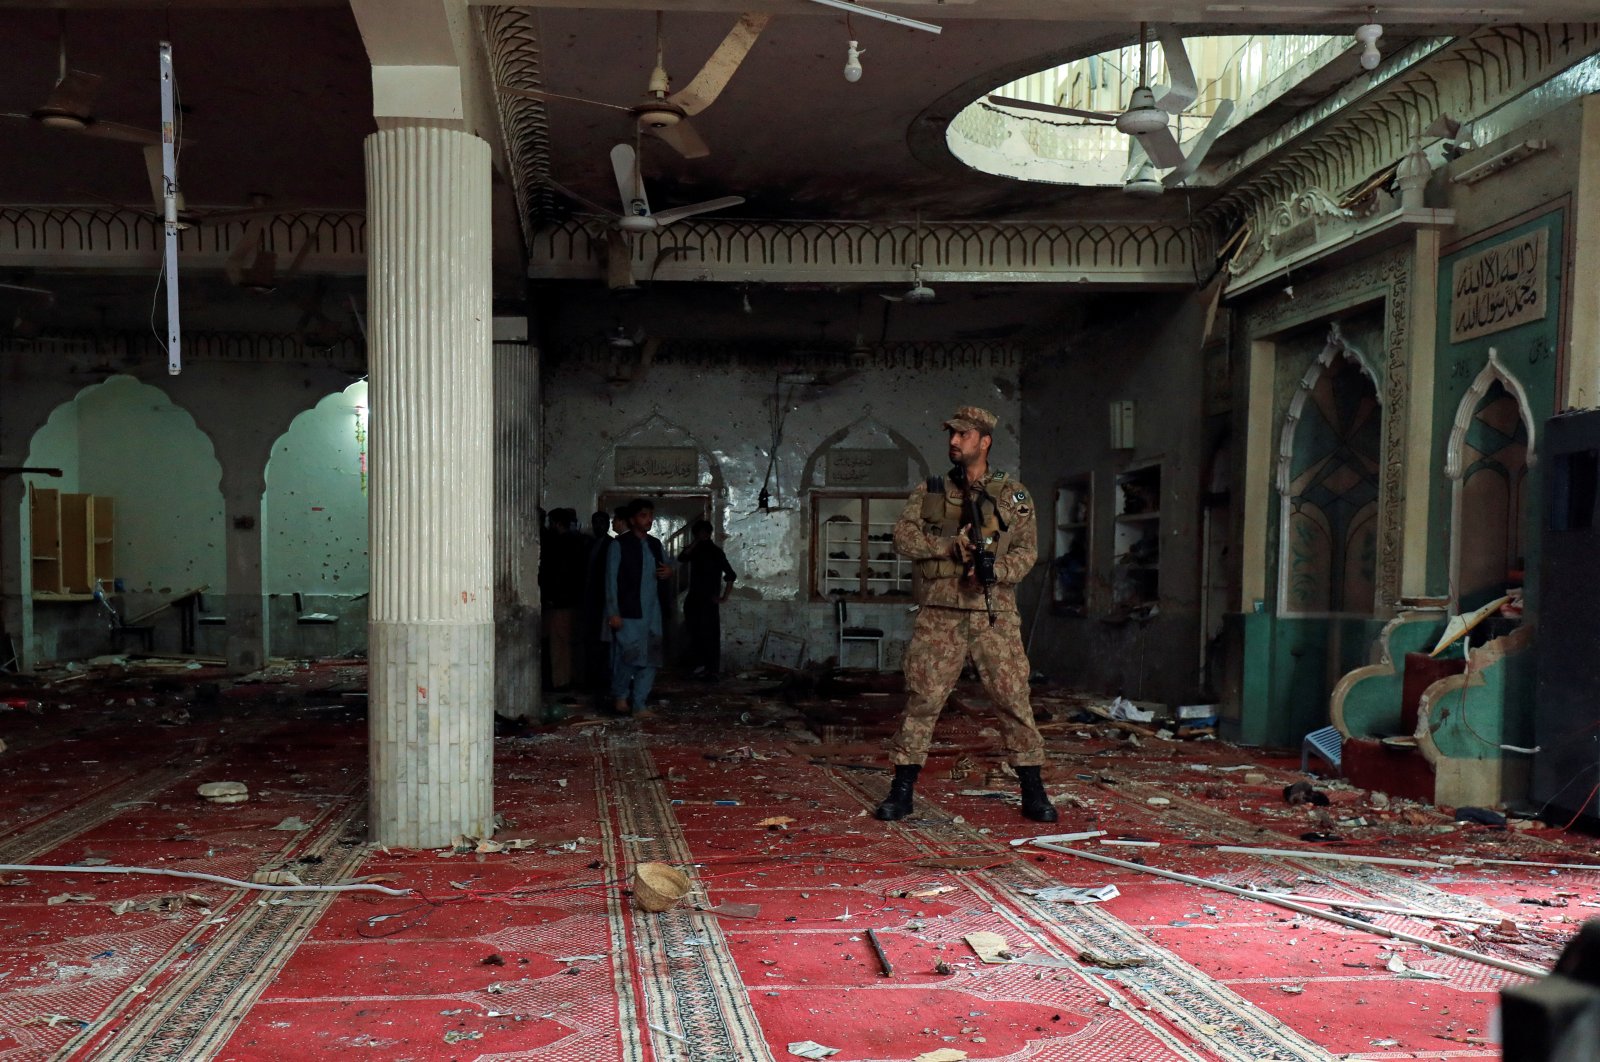 An army soldier stands amid the damages at the prayer hall after a bomb blast inside a mosque during Friday prayers in Peshawar, Pakistan, March 4, 2022. (REUTERS Photo)